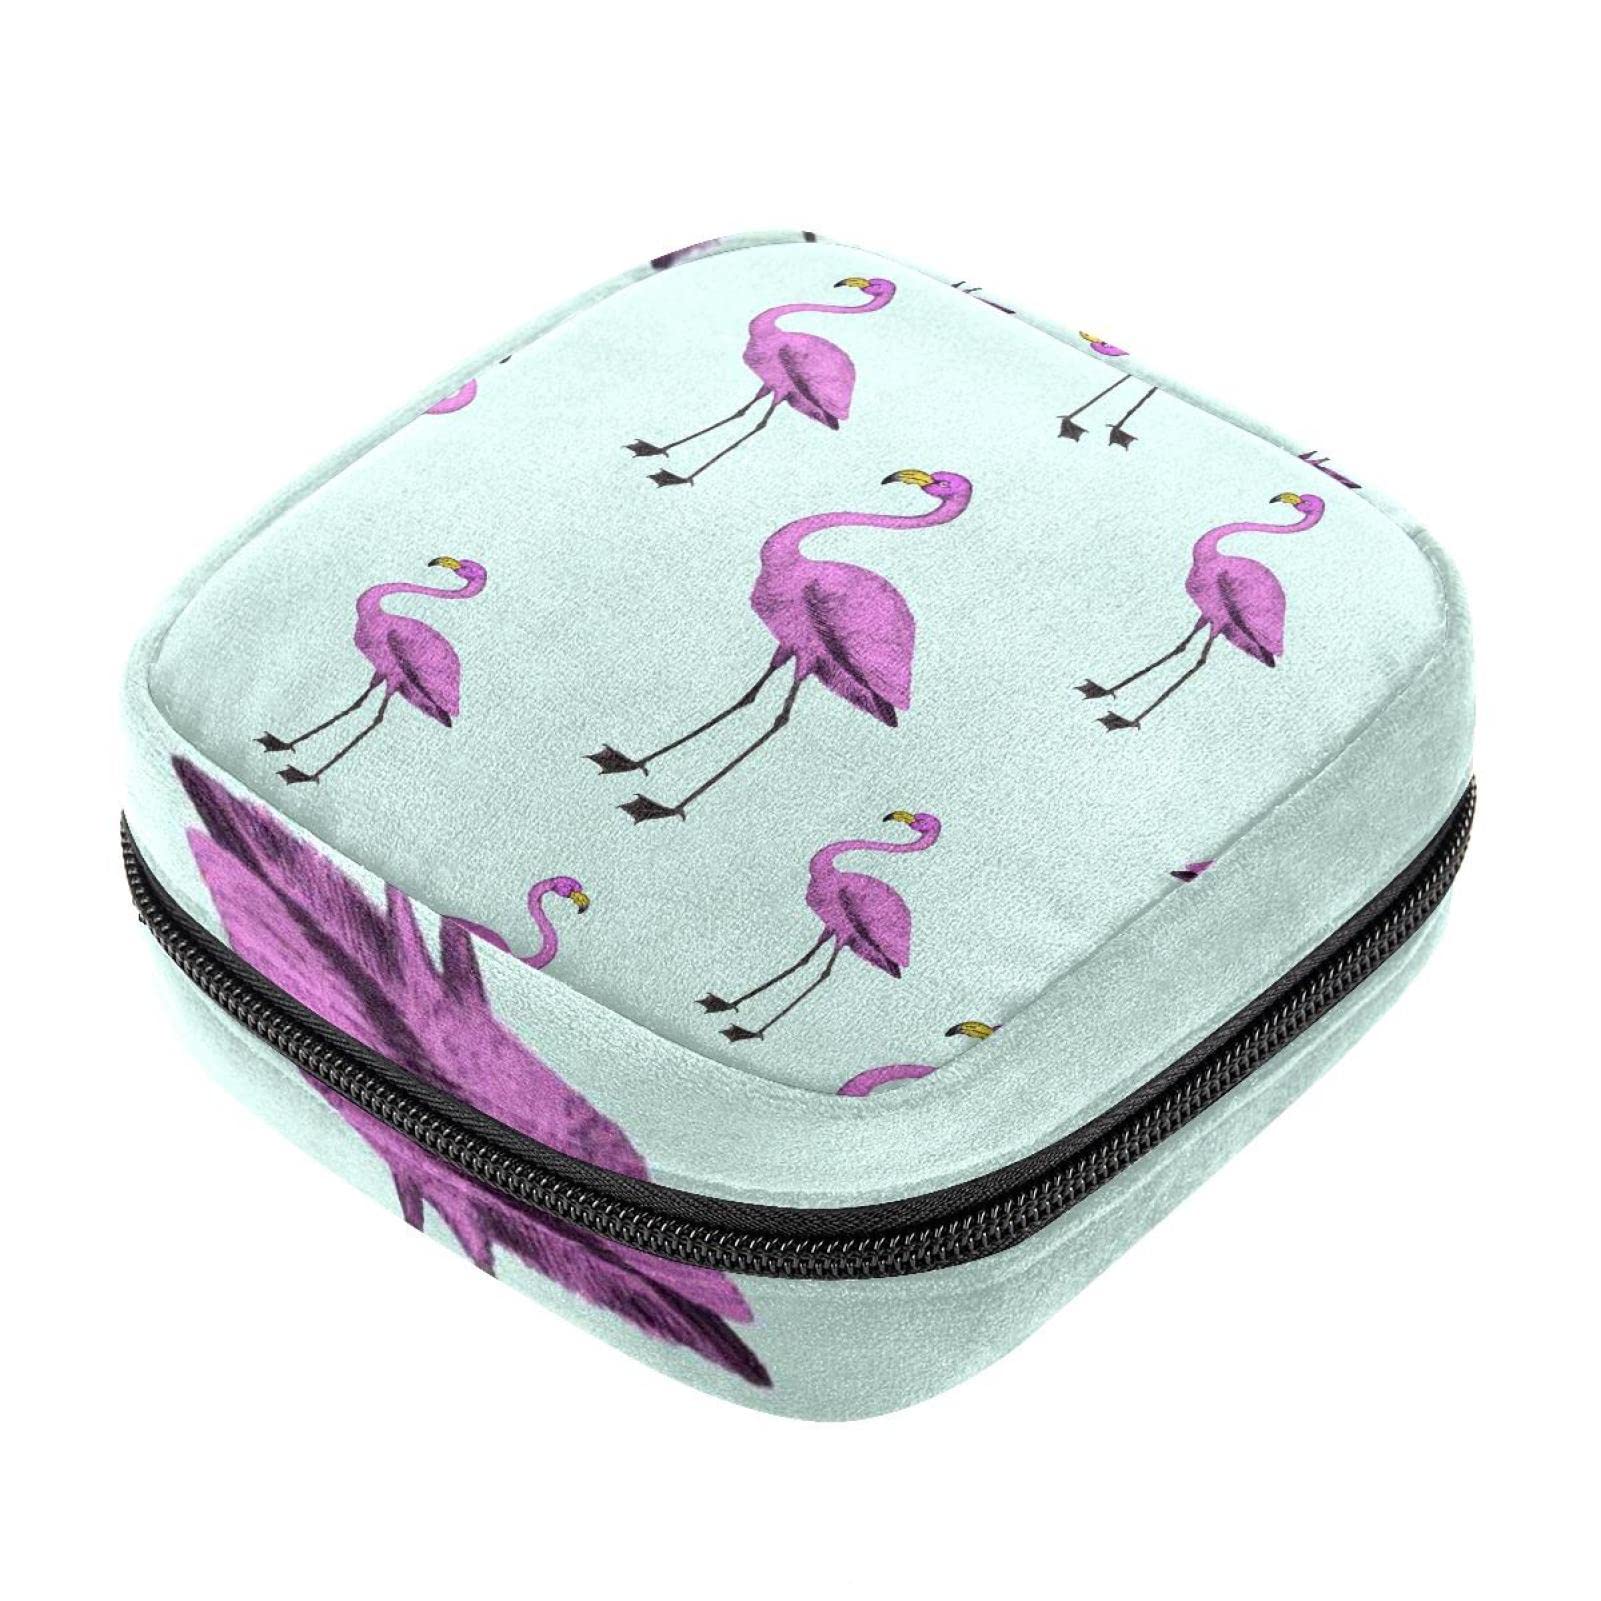 Period Bag, Sanitary Pad Pouch, Privacy Period Pouch, Tampon Holder,  Sanitary Pouch, Sanitary Pad Holder, Sanitary Napkin Storage Bag - Etsy |  Pad bag, Padded pouch, Sanitary napkin